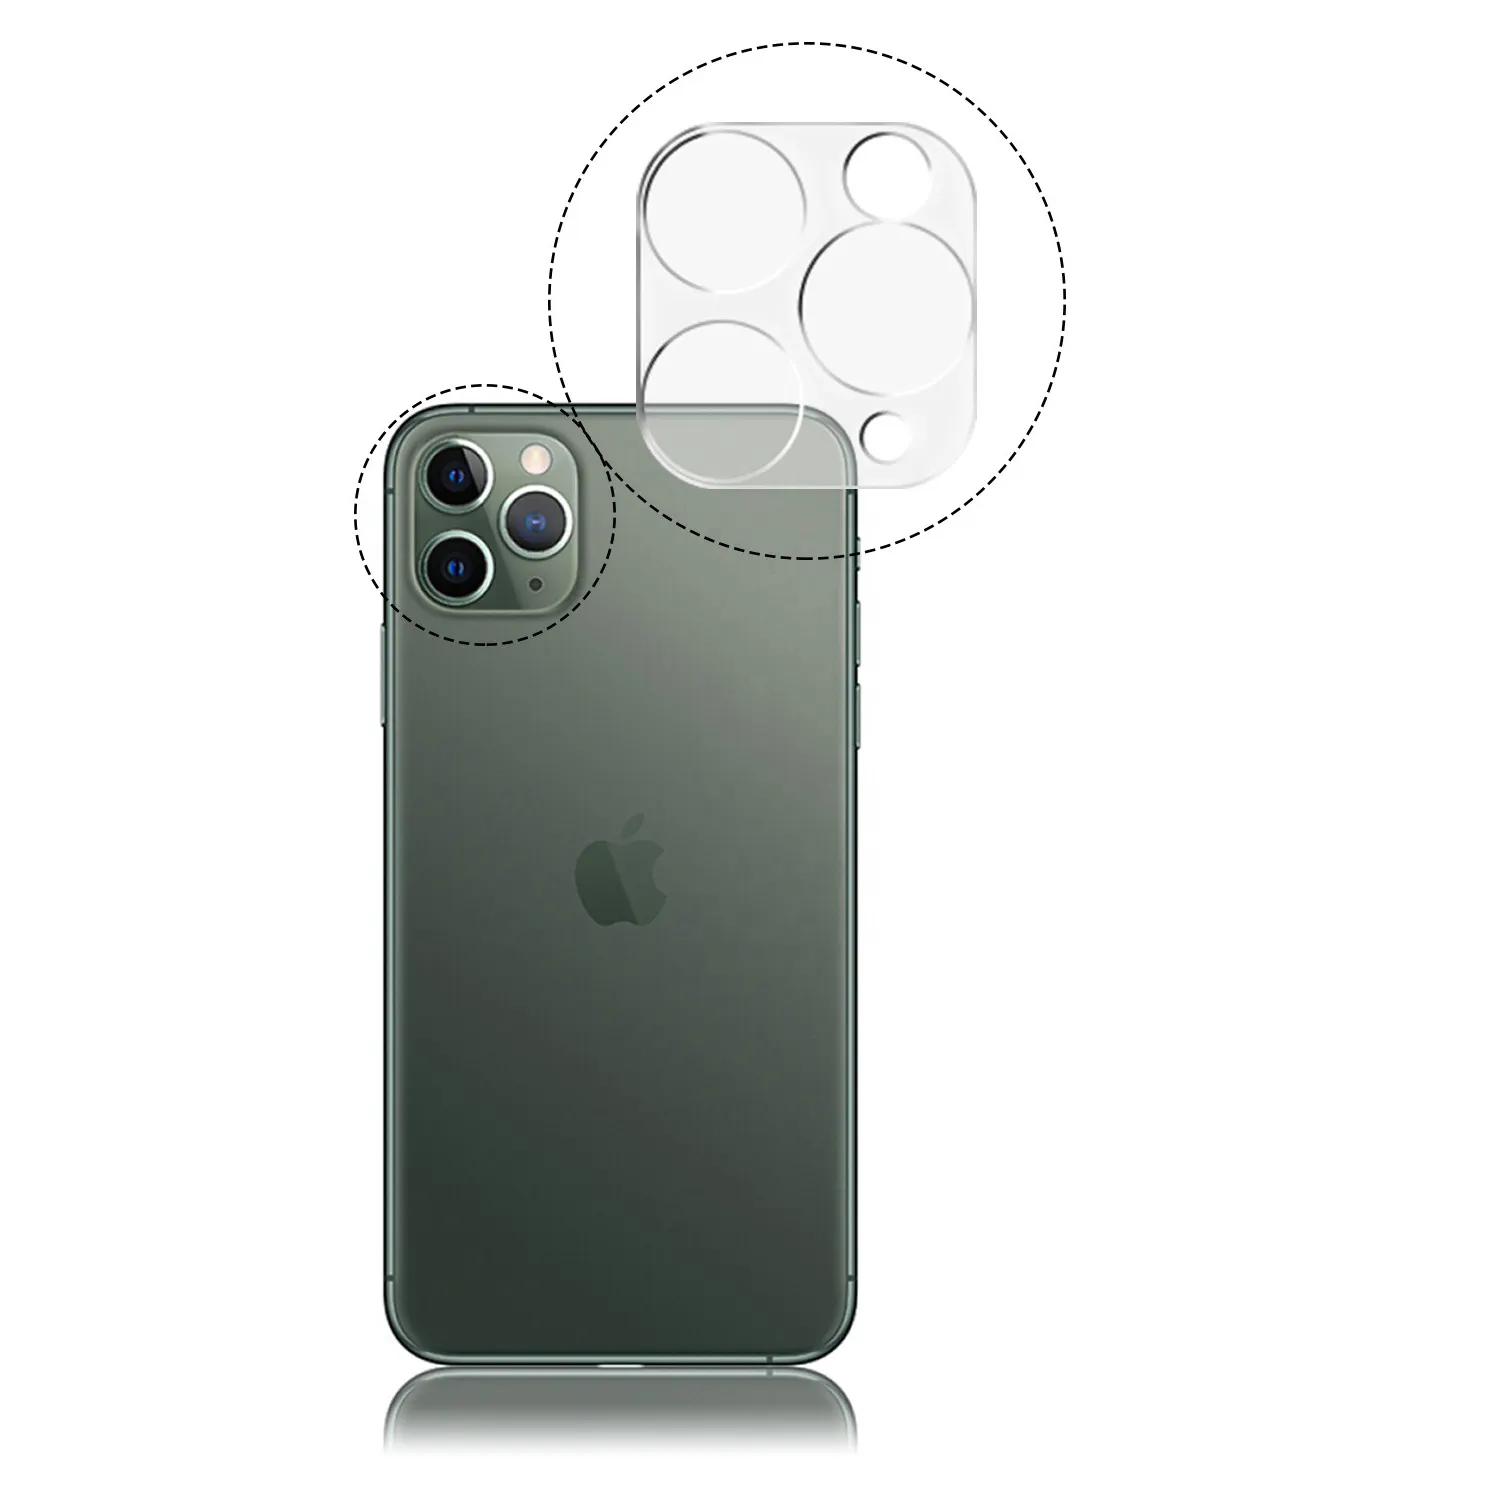 Camera Lens Protector 3D Oneness HD Clear 9H Tempered Glass Anti-Scratch Anti-Fingerprints No Bubbles for iPhone 11 Pro MAX